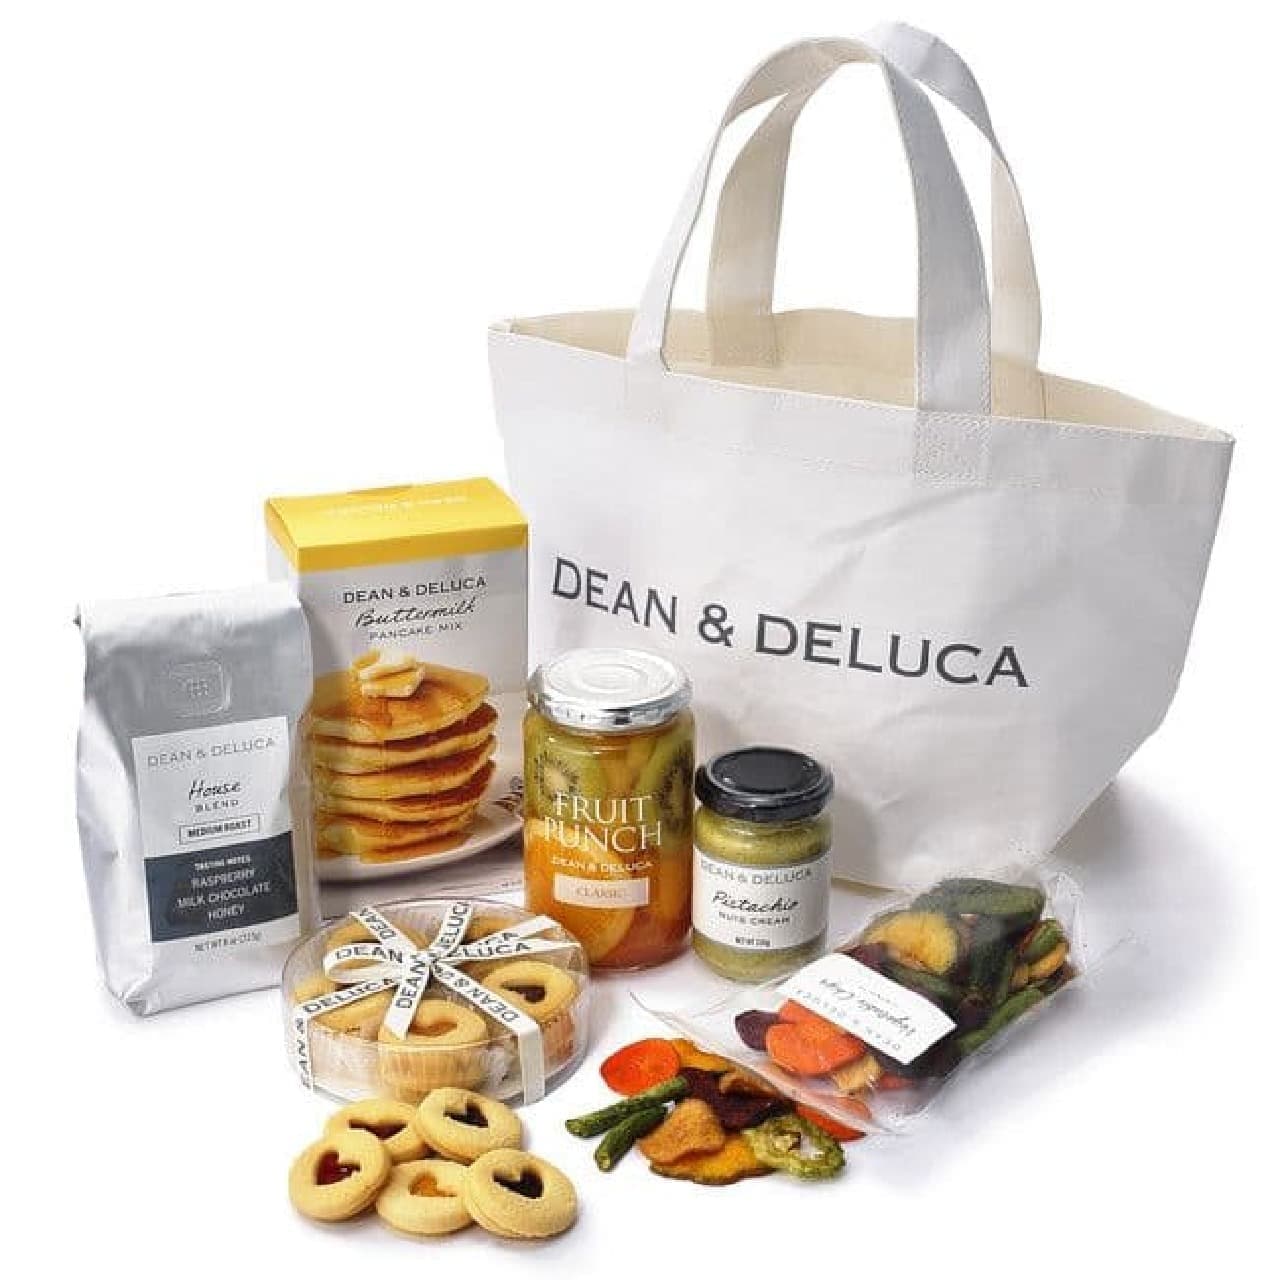 DEAN ＆ DELUCA “福袋2022”「Sweets Time Assortment」